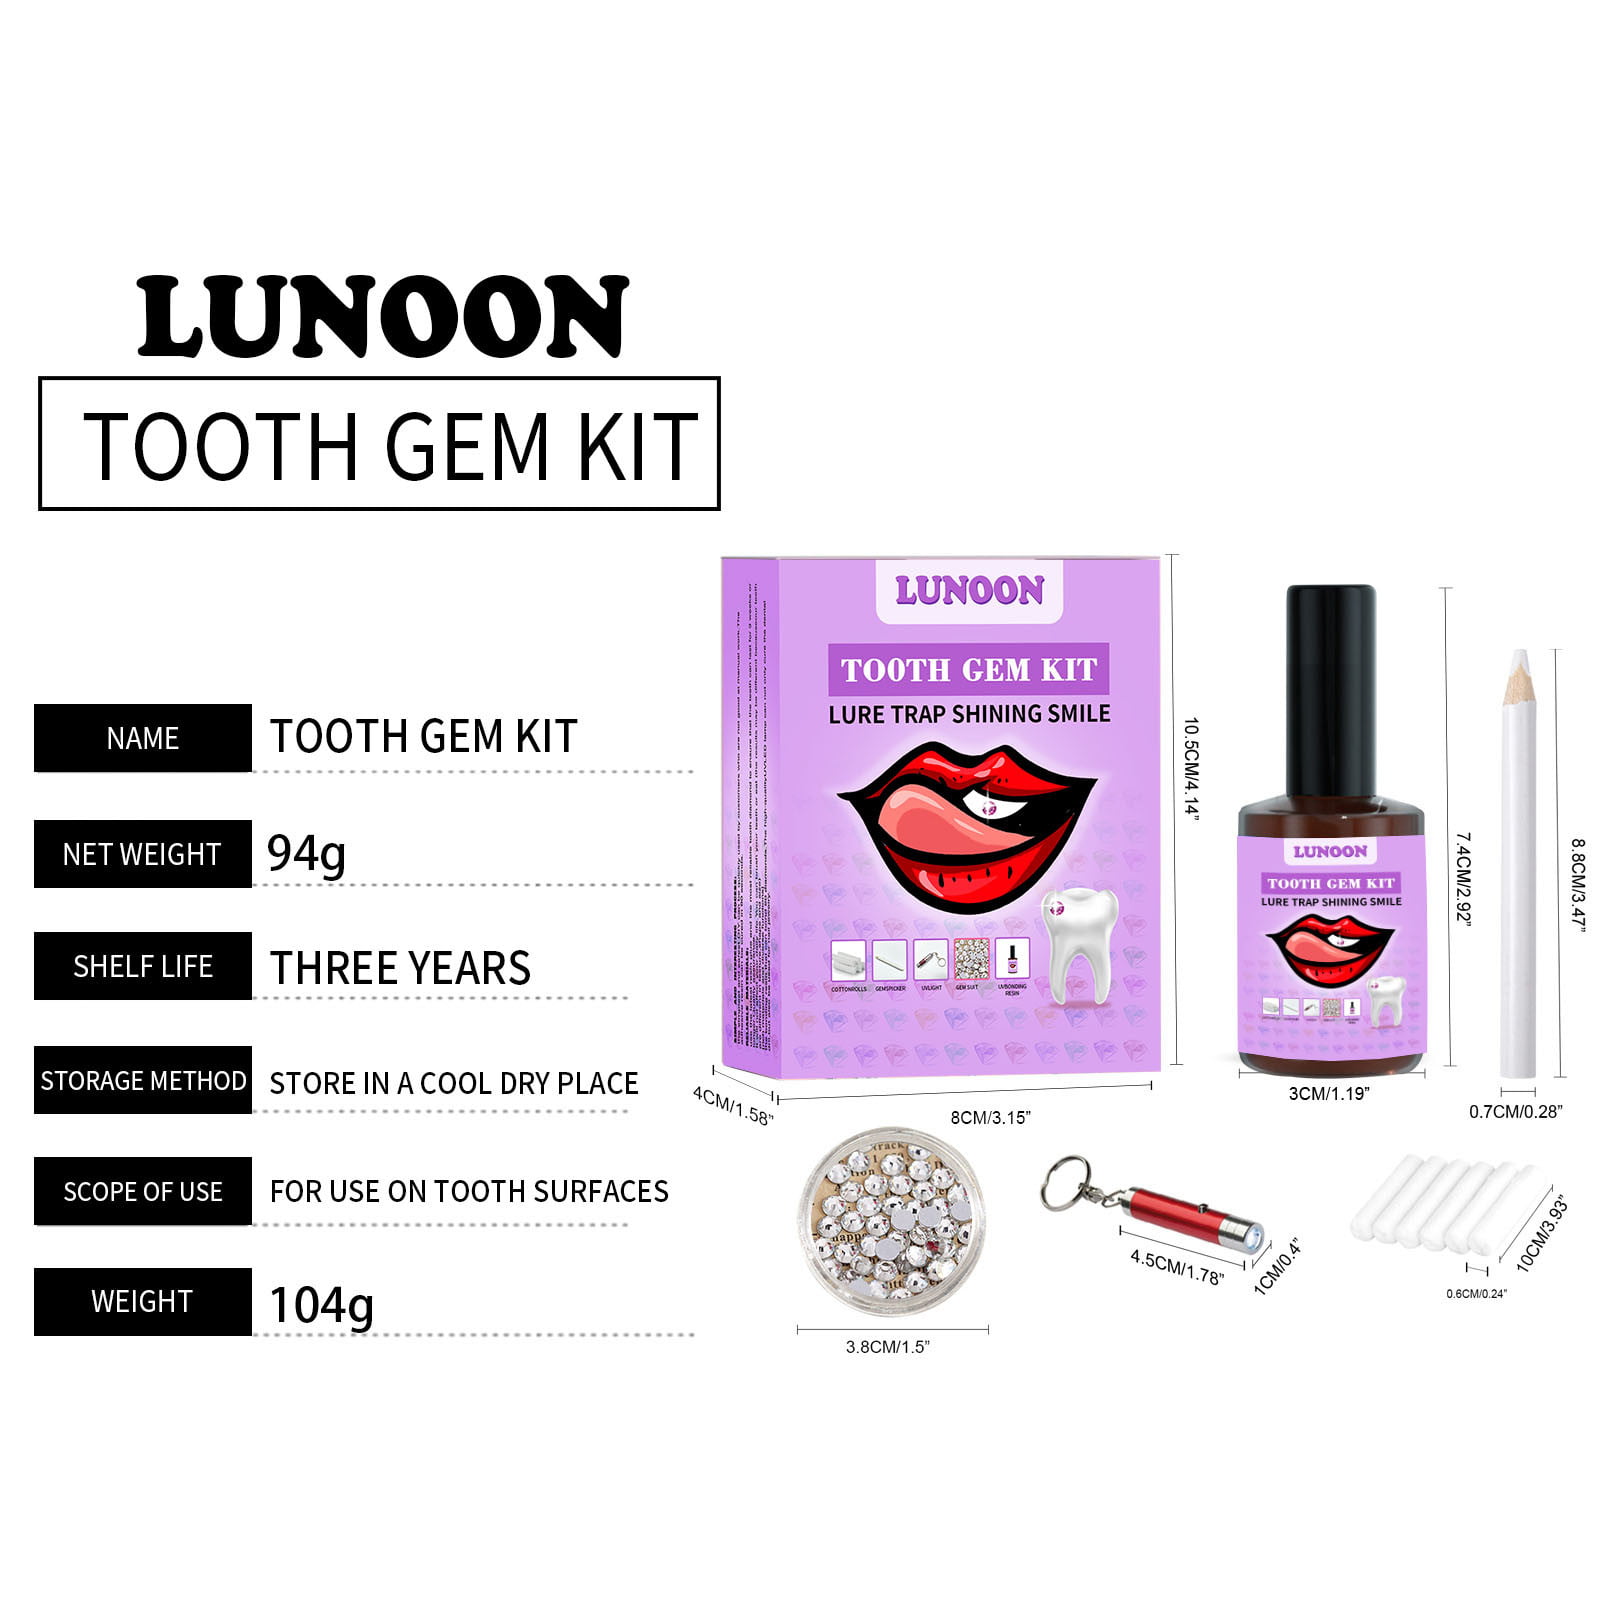 Tooth Gem Kit - DIY Tooth Gem Kit with Curing Light and Glue, Crystals Jewelry  Kit, Teeth Gems for Reflective Tooth Adornment Decoration 